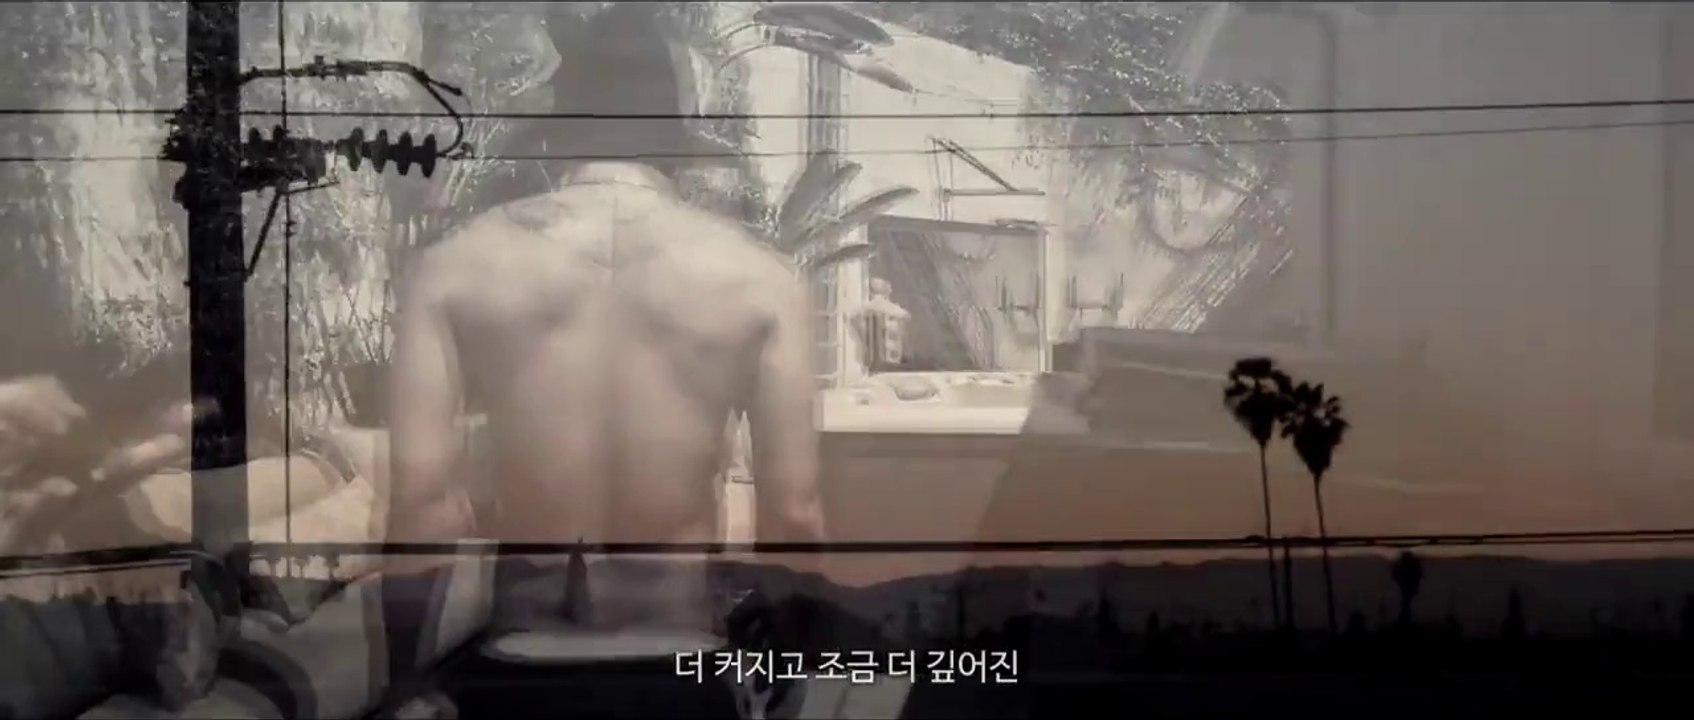 Taeyang - Journey to Rise (documentary)